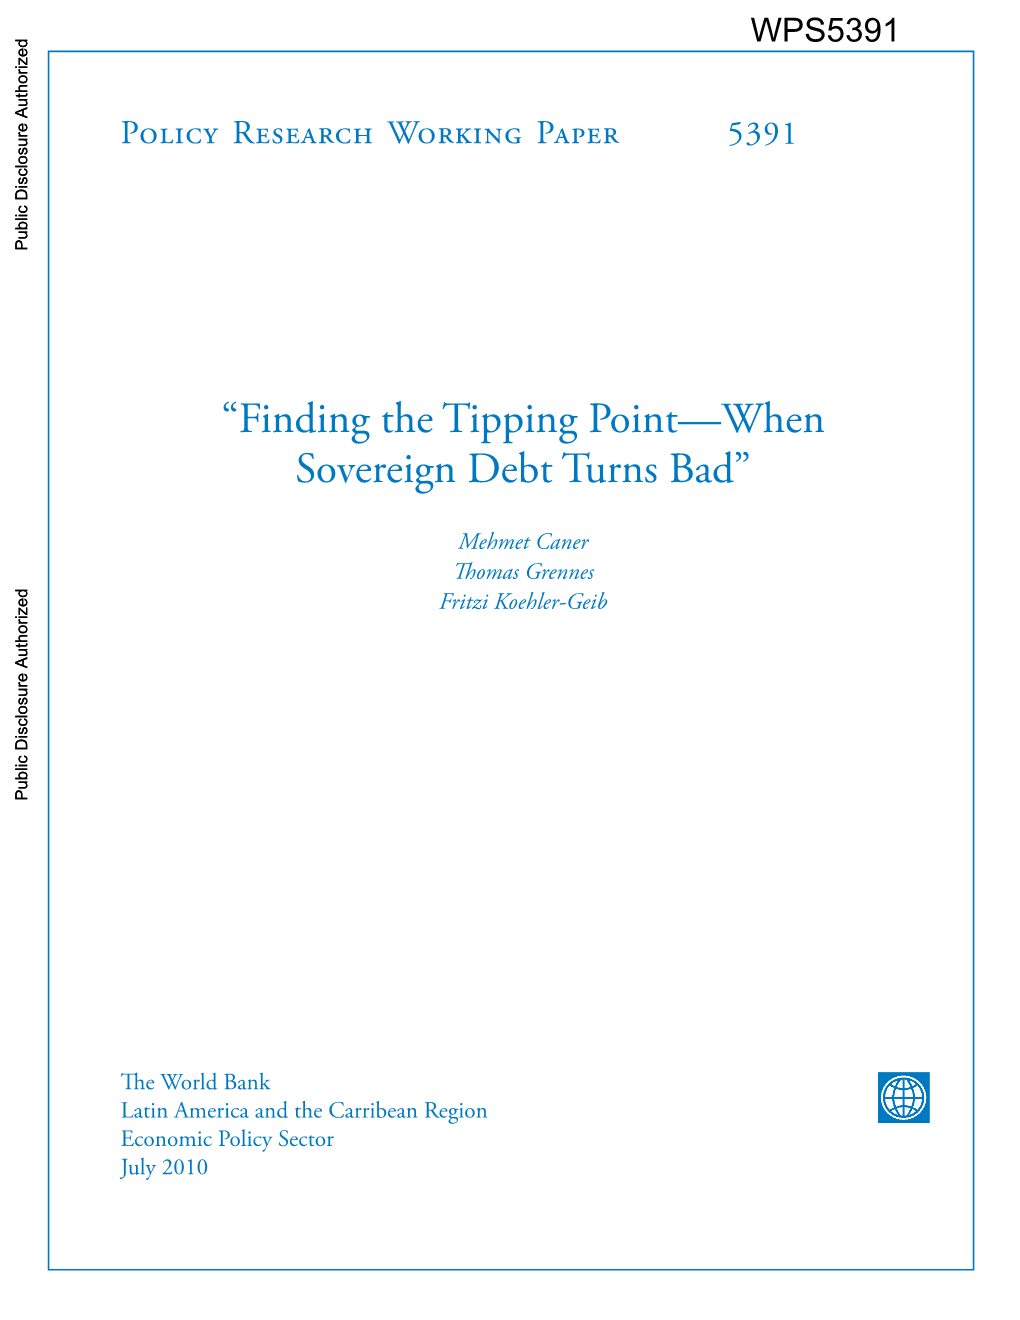 Finding the Tipping Point—When Sovereign Debt Turns Bad”